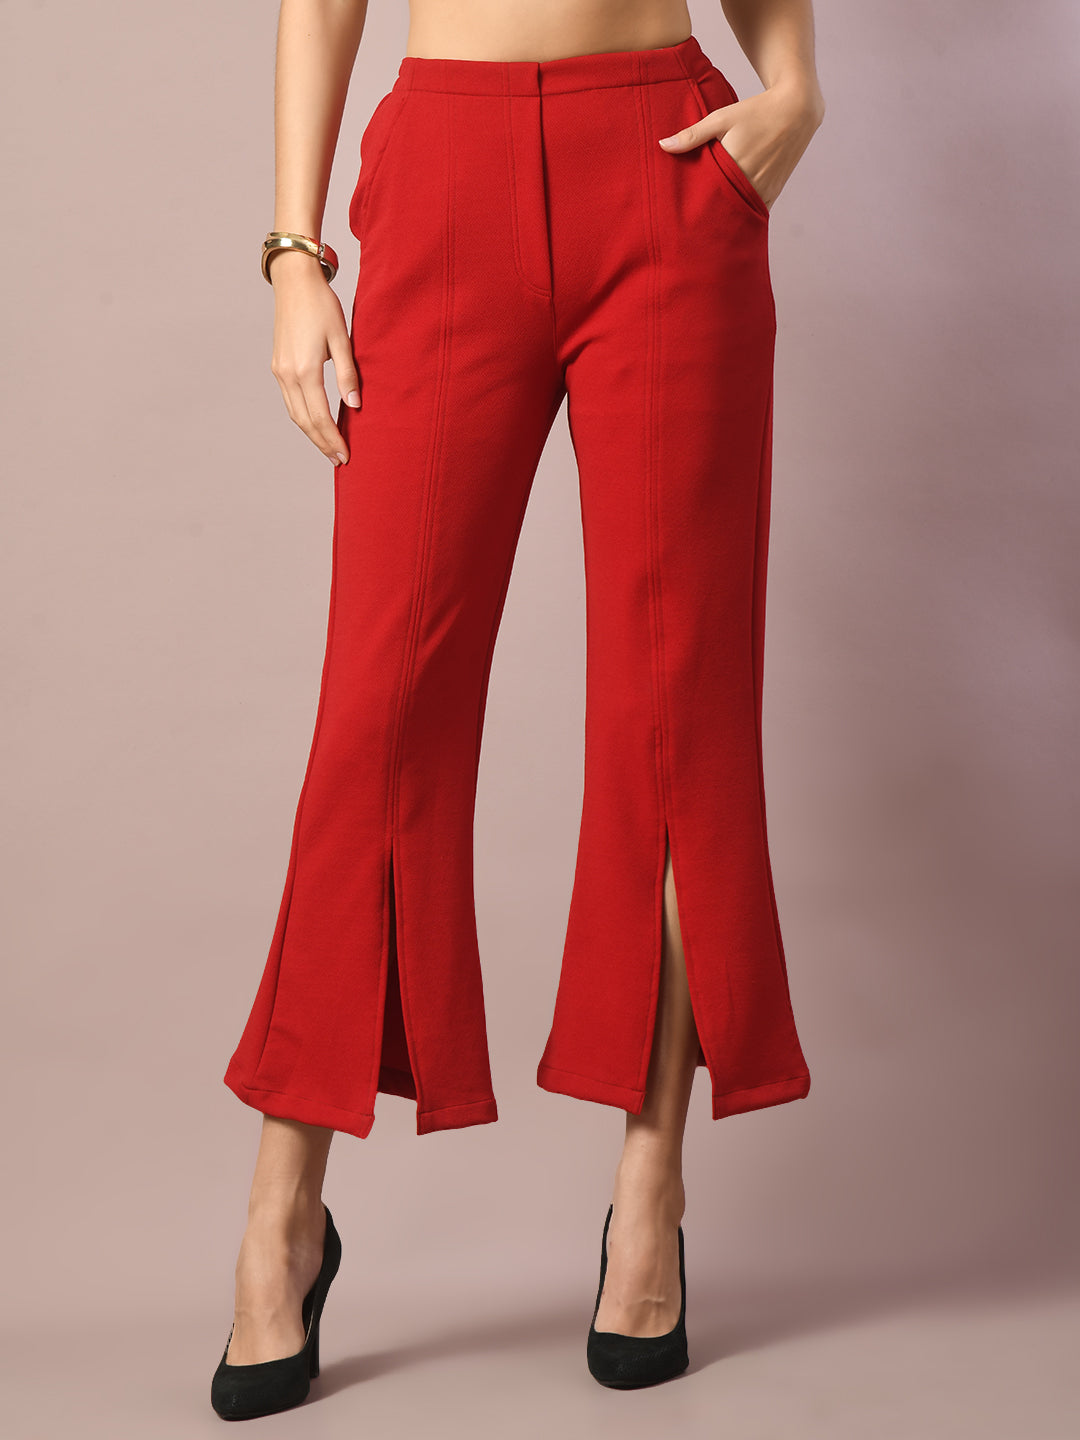 Women's  Red Solid Party Parallel Trousers   - Myshka